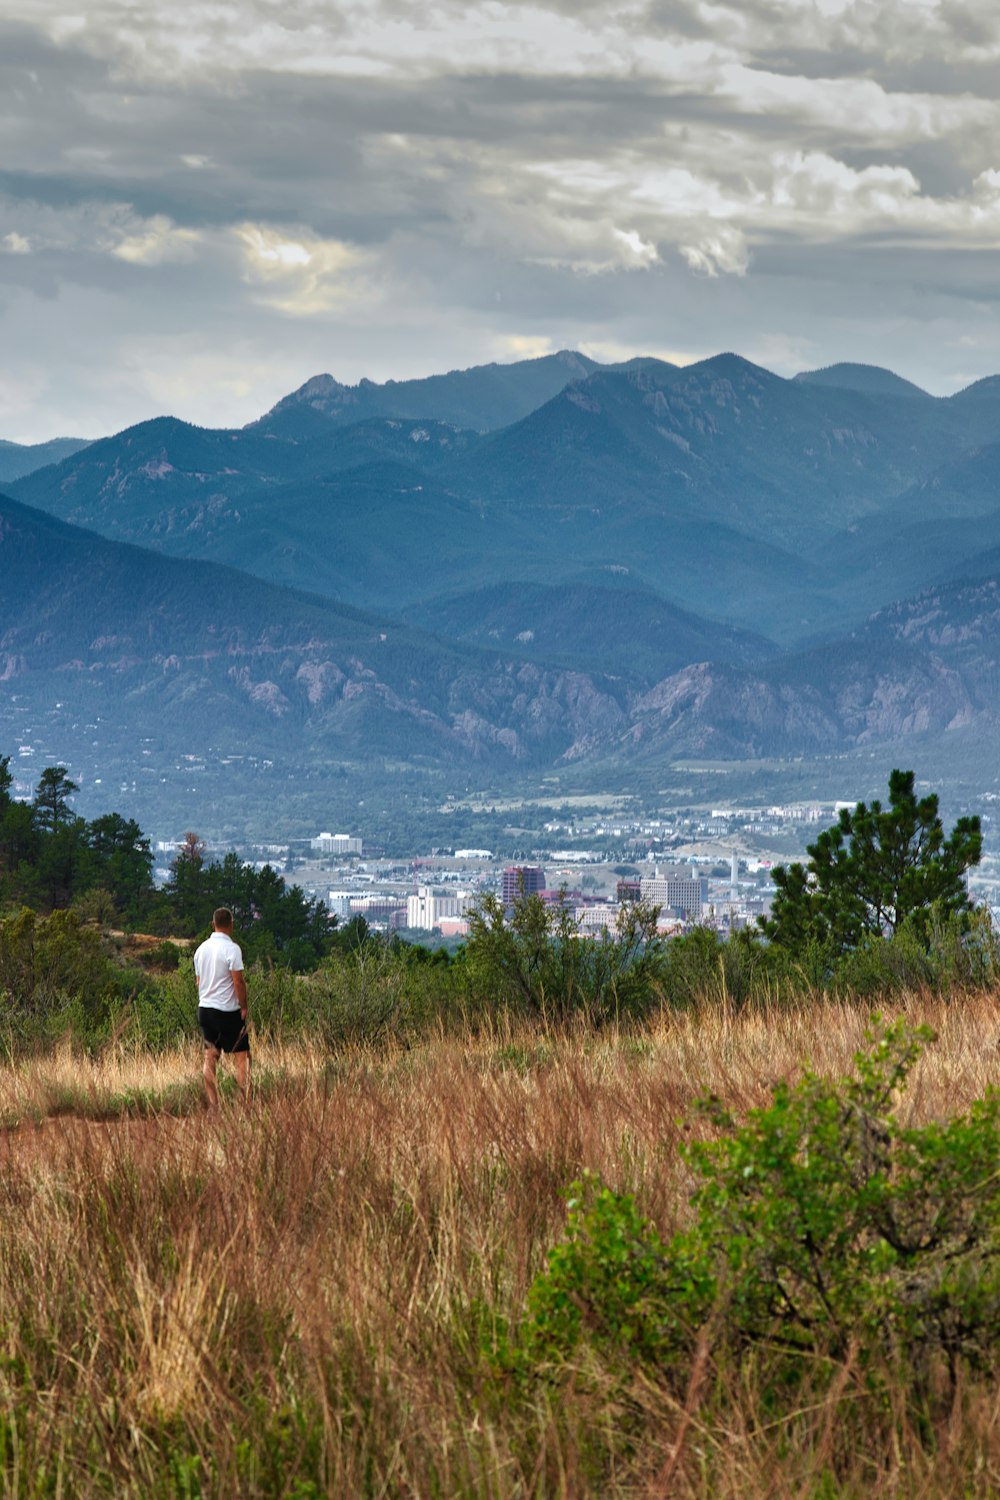 a person standing on a hill overlooking a city and mountains